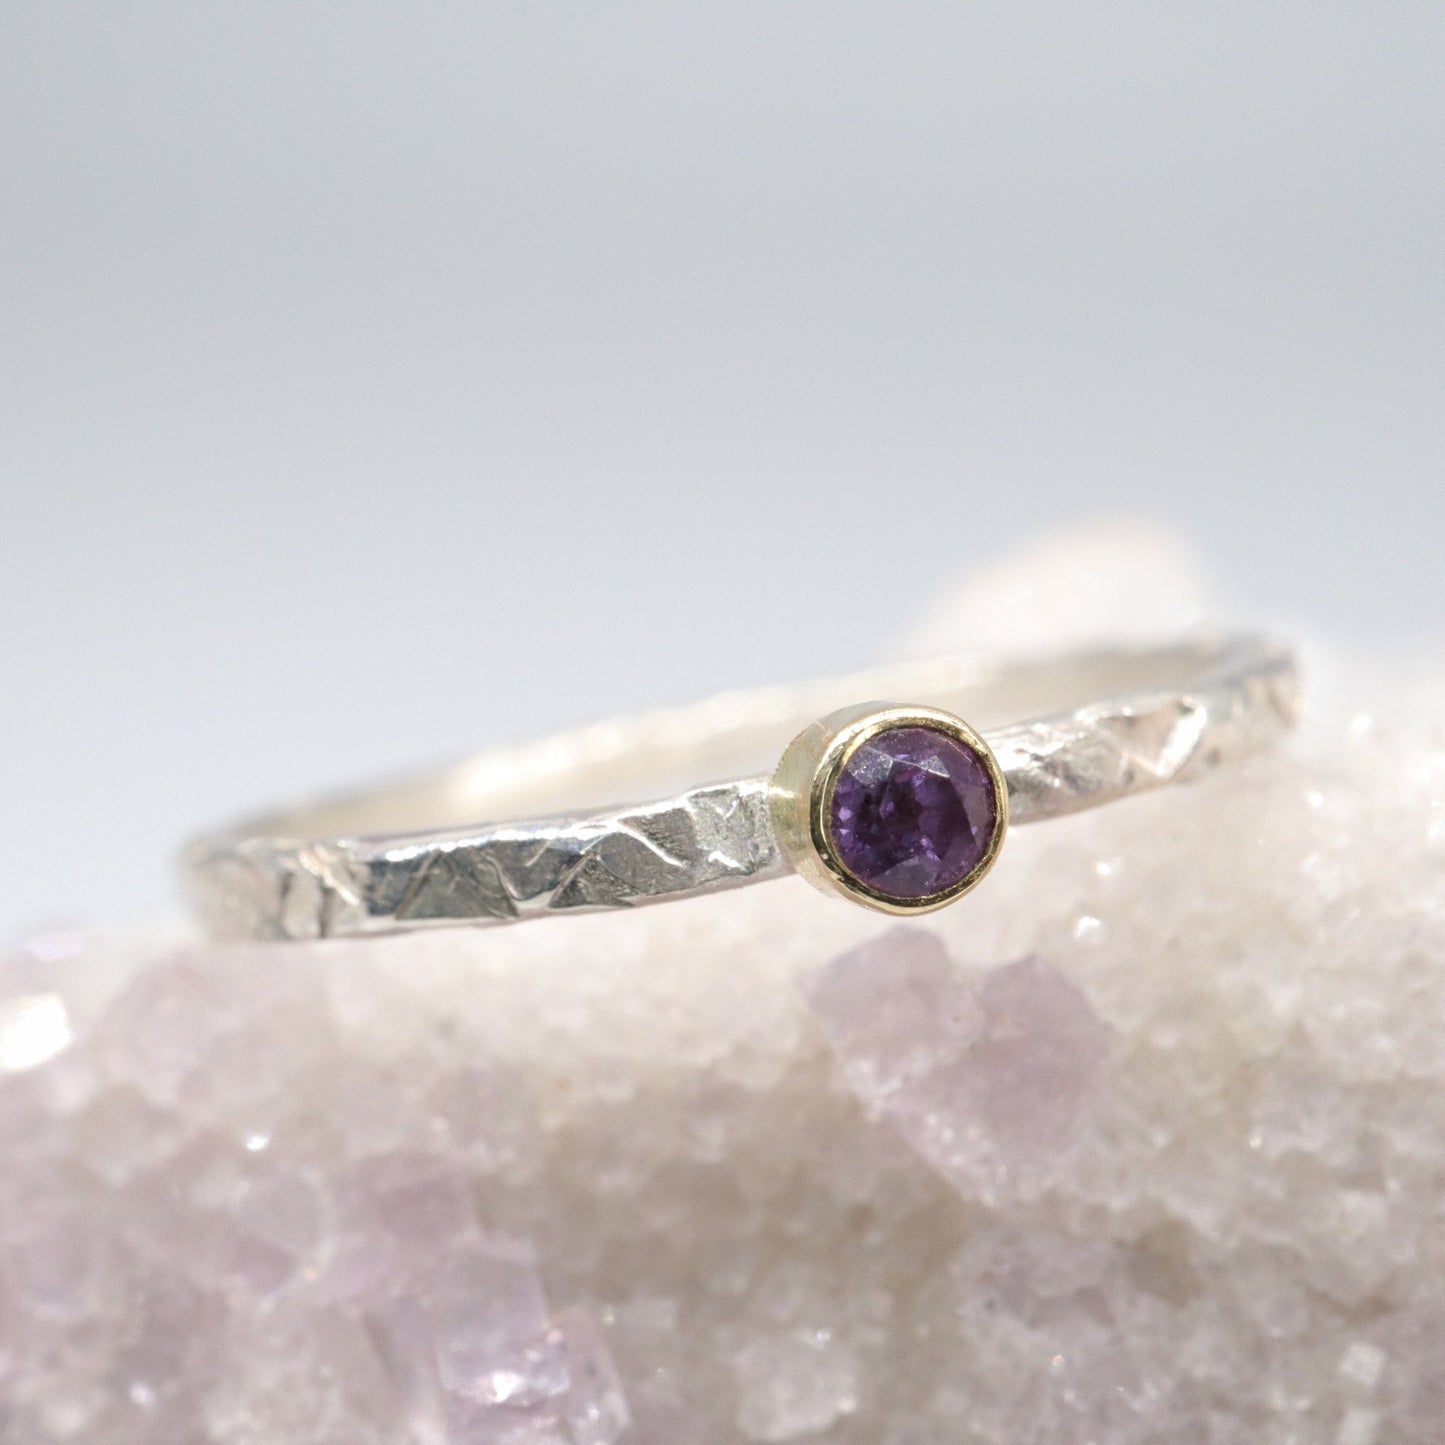 Amethyst 18ct gold and silver stacking ring, Striding Edge design.